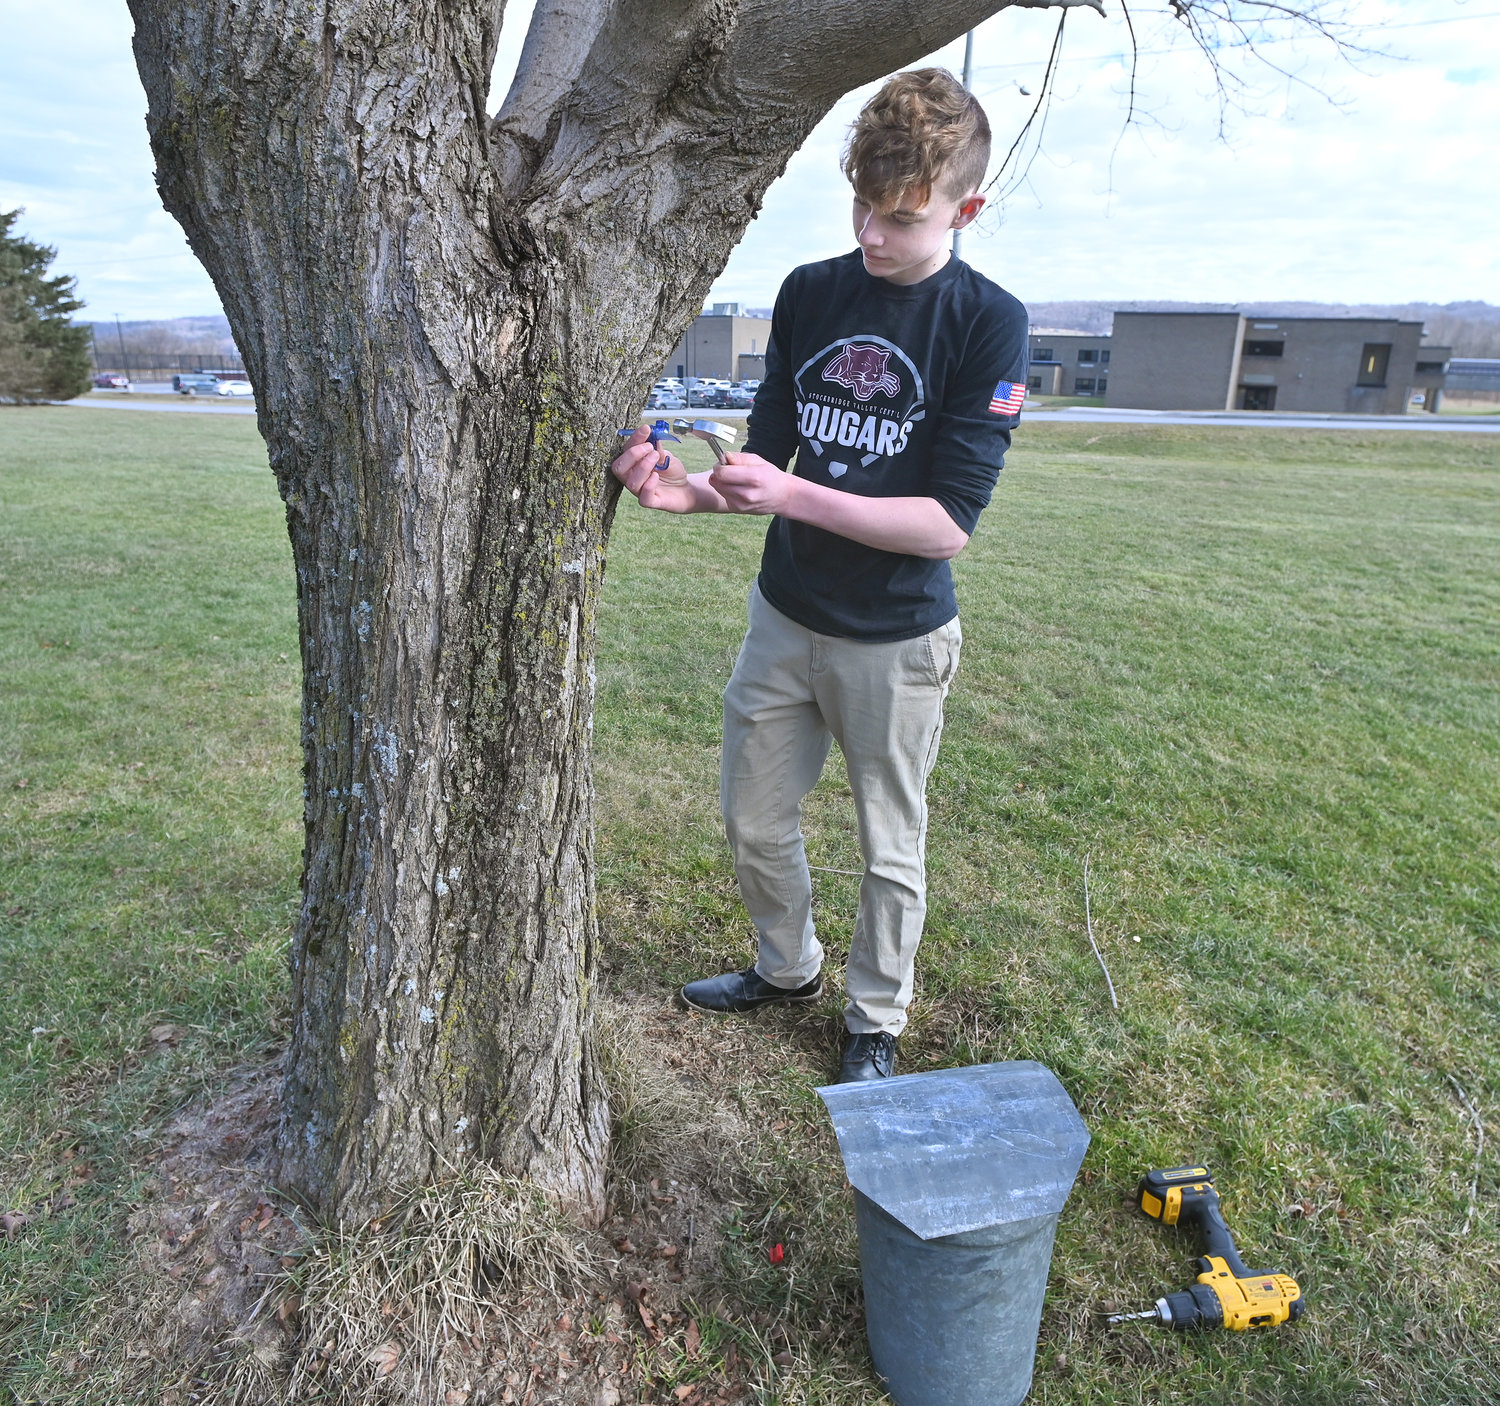 Sullivan Tifft, a 10th grader at Stockbridge Valley Central School, demonstrates tapping a maple tree Wednesday, Feb. 15 at the Munnsville school.